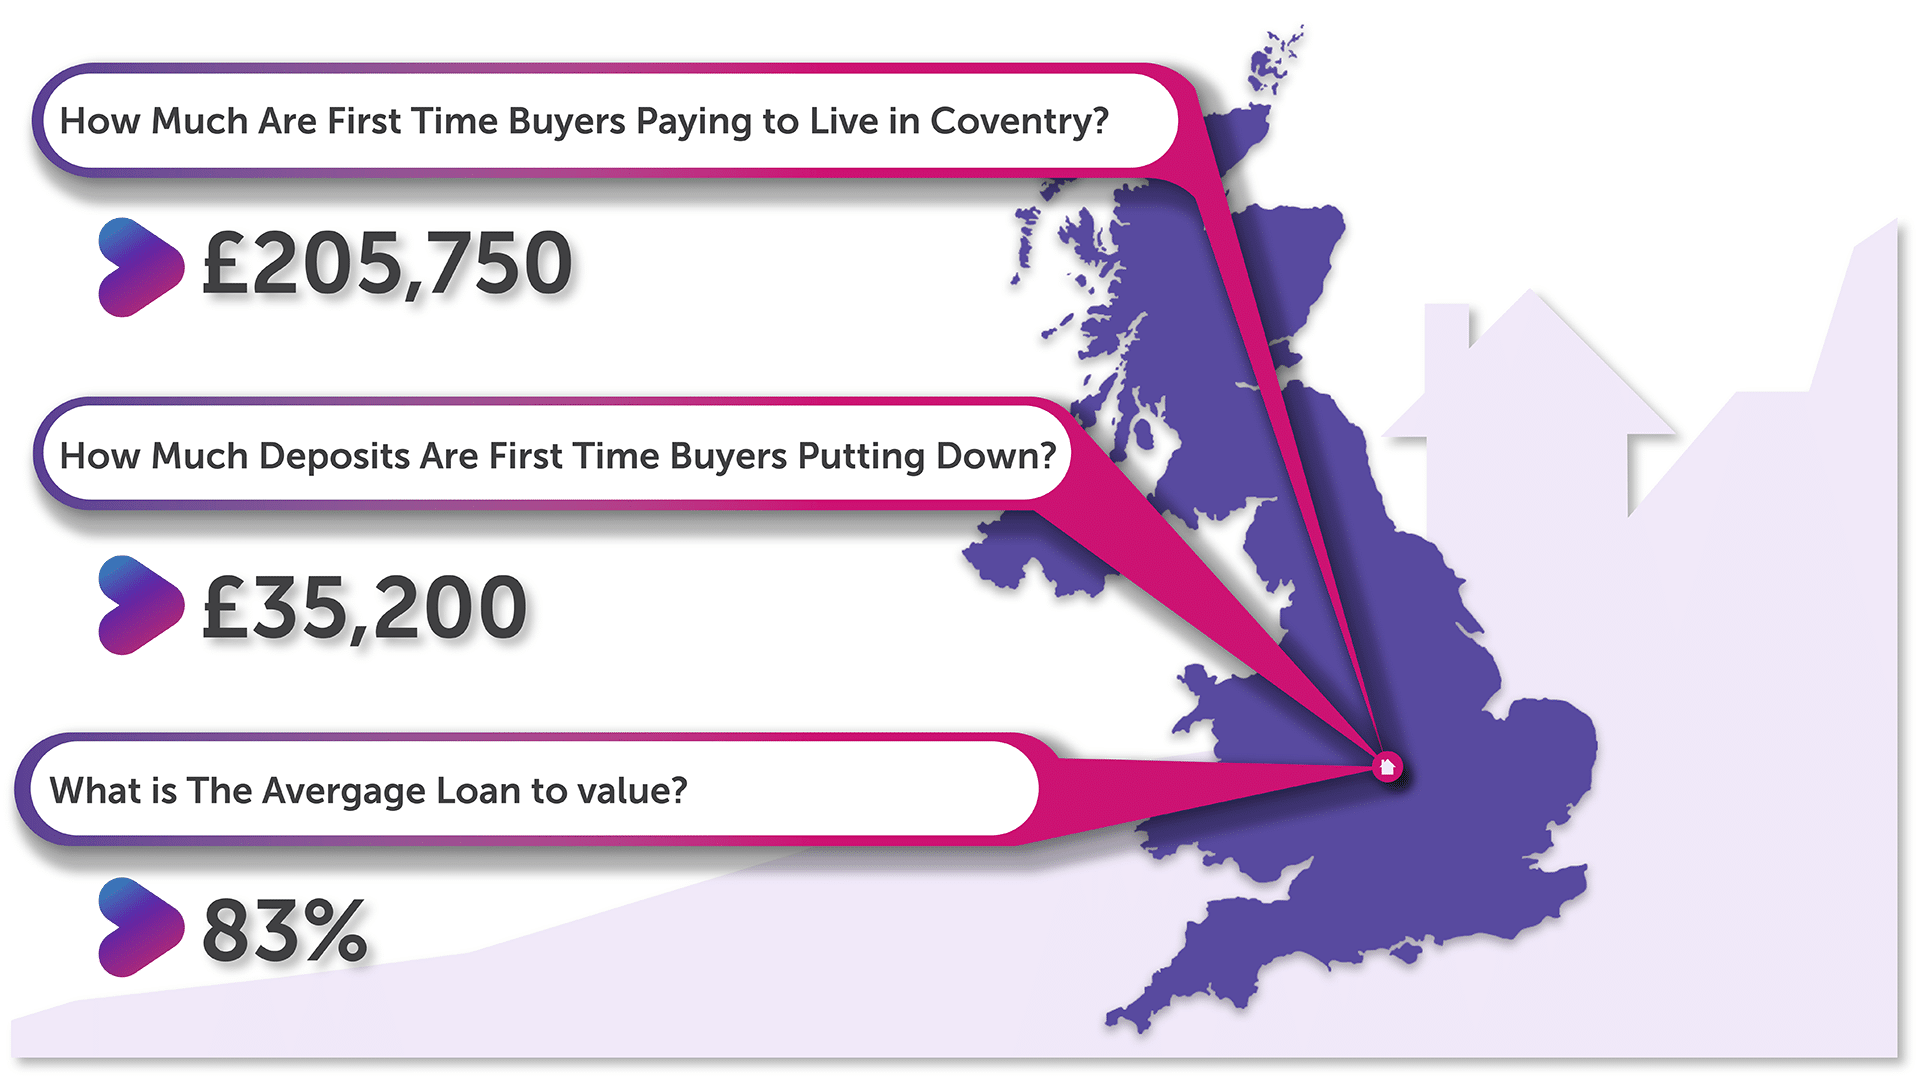 How Much Deposit Are First Time Buyers in Coventry Putting Down?